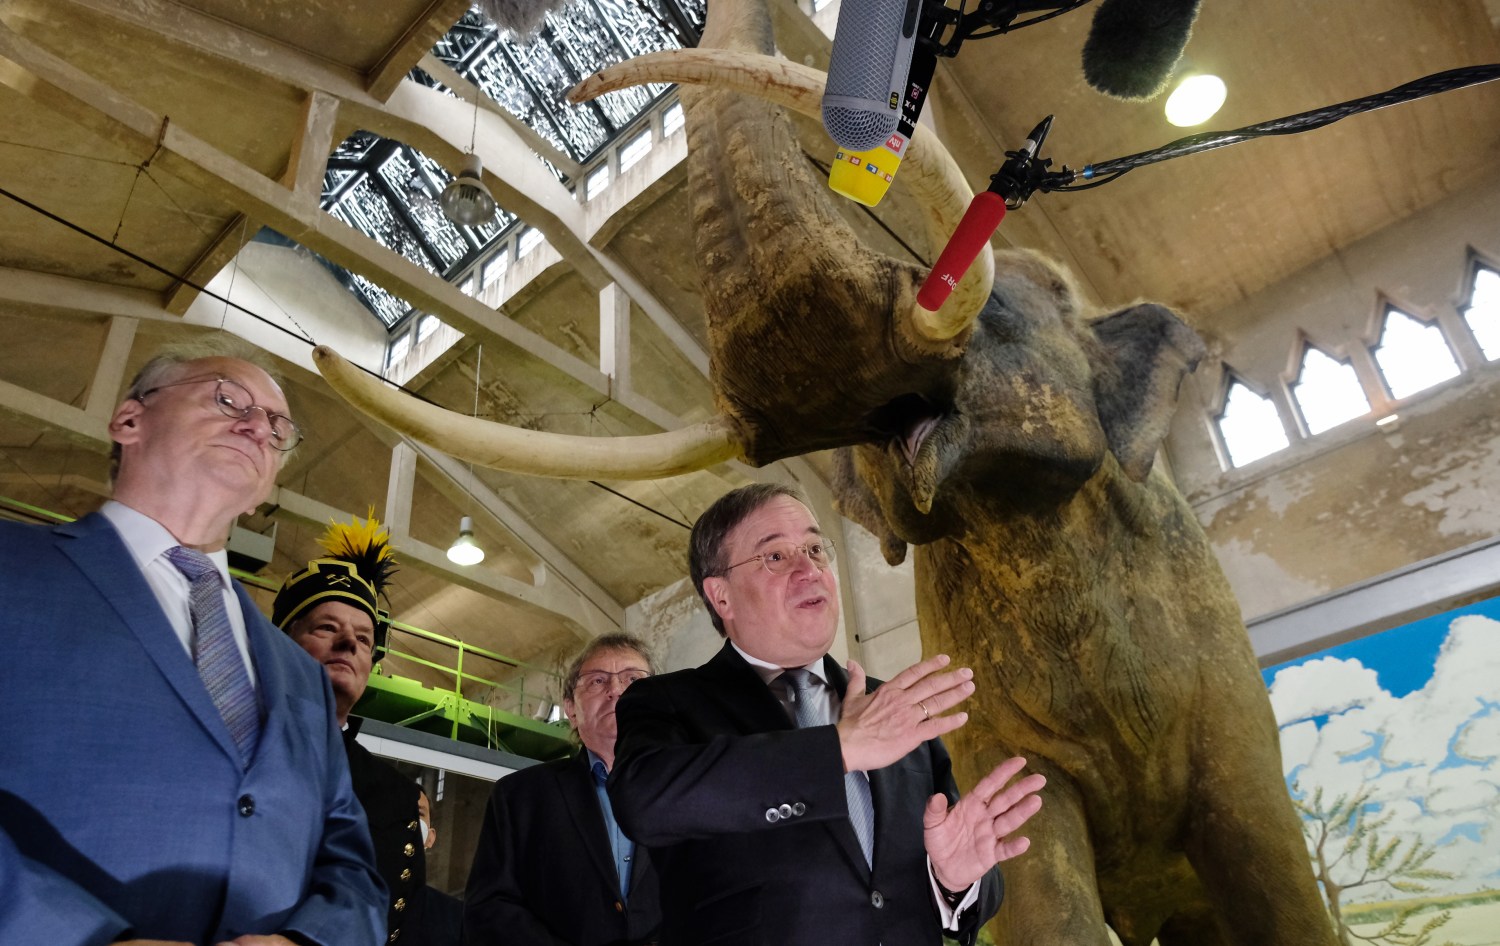 Reiner Haseloff (CDU, l), Minister President of Saxony-Anhalt, stands next to Armin Laschet (CDU), Minister President of North Rhine-Westphalia and candidate for the chancellorship of the CDU/CSU, in front of a model of a forest elephant that lived 200,000 years ago at the Pfännerhall exhibition centre. A new state parliament will be elected in Saxony-Anhalt on 06.06.2021.